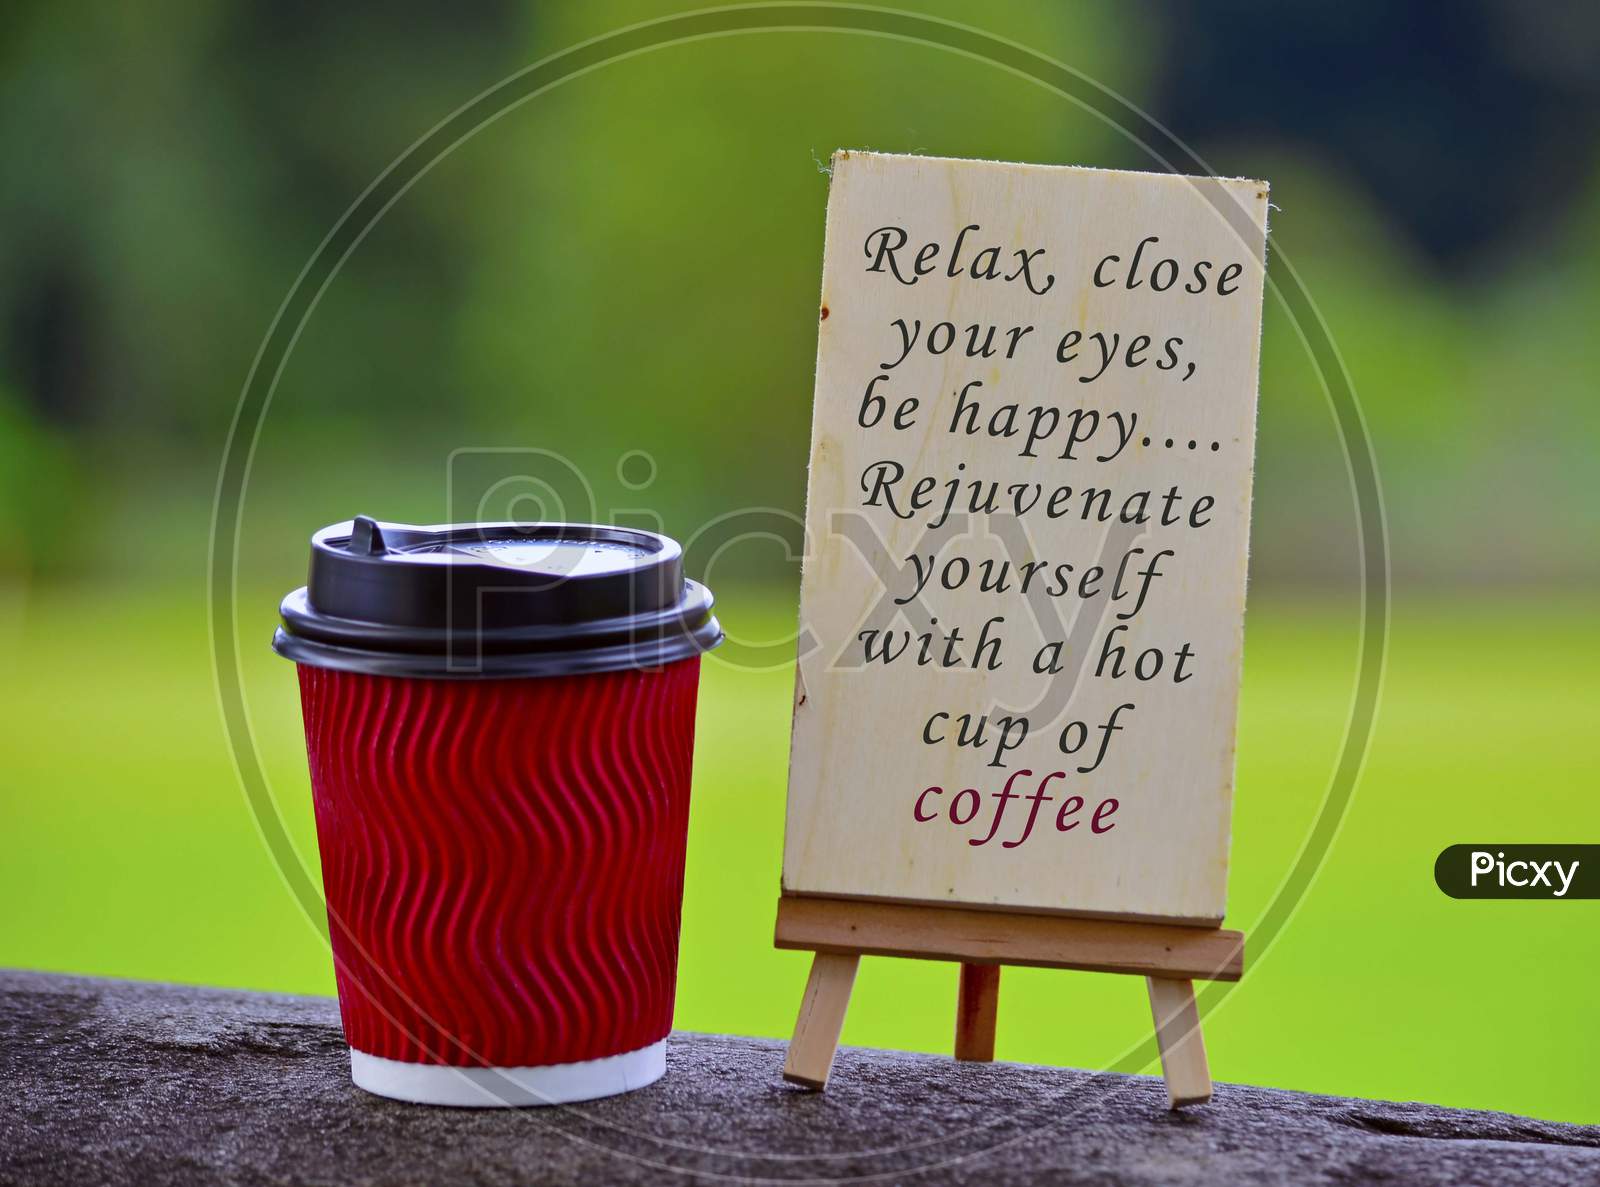 Red paper cup of coffee with text written on chalkboard and greenery background